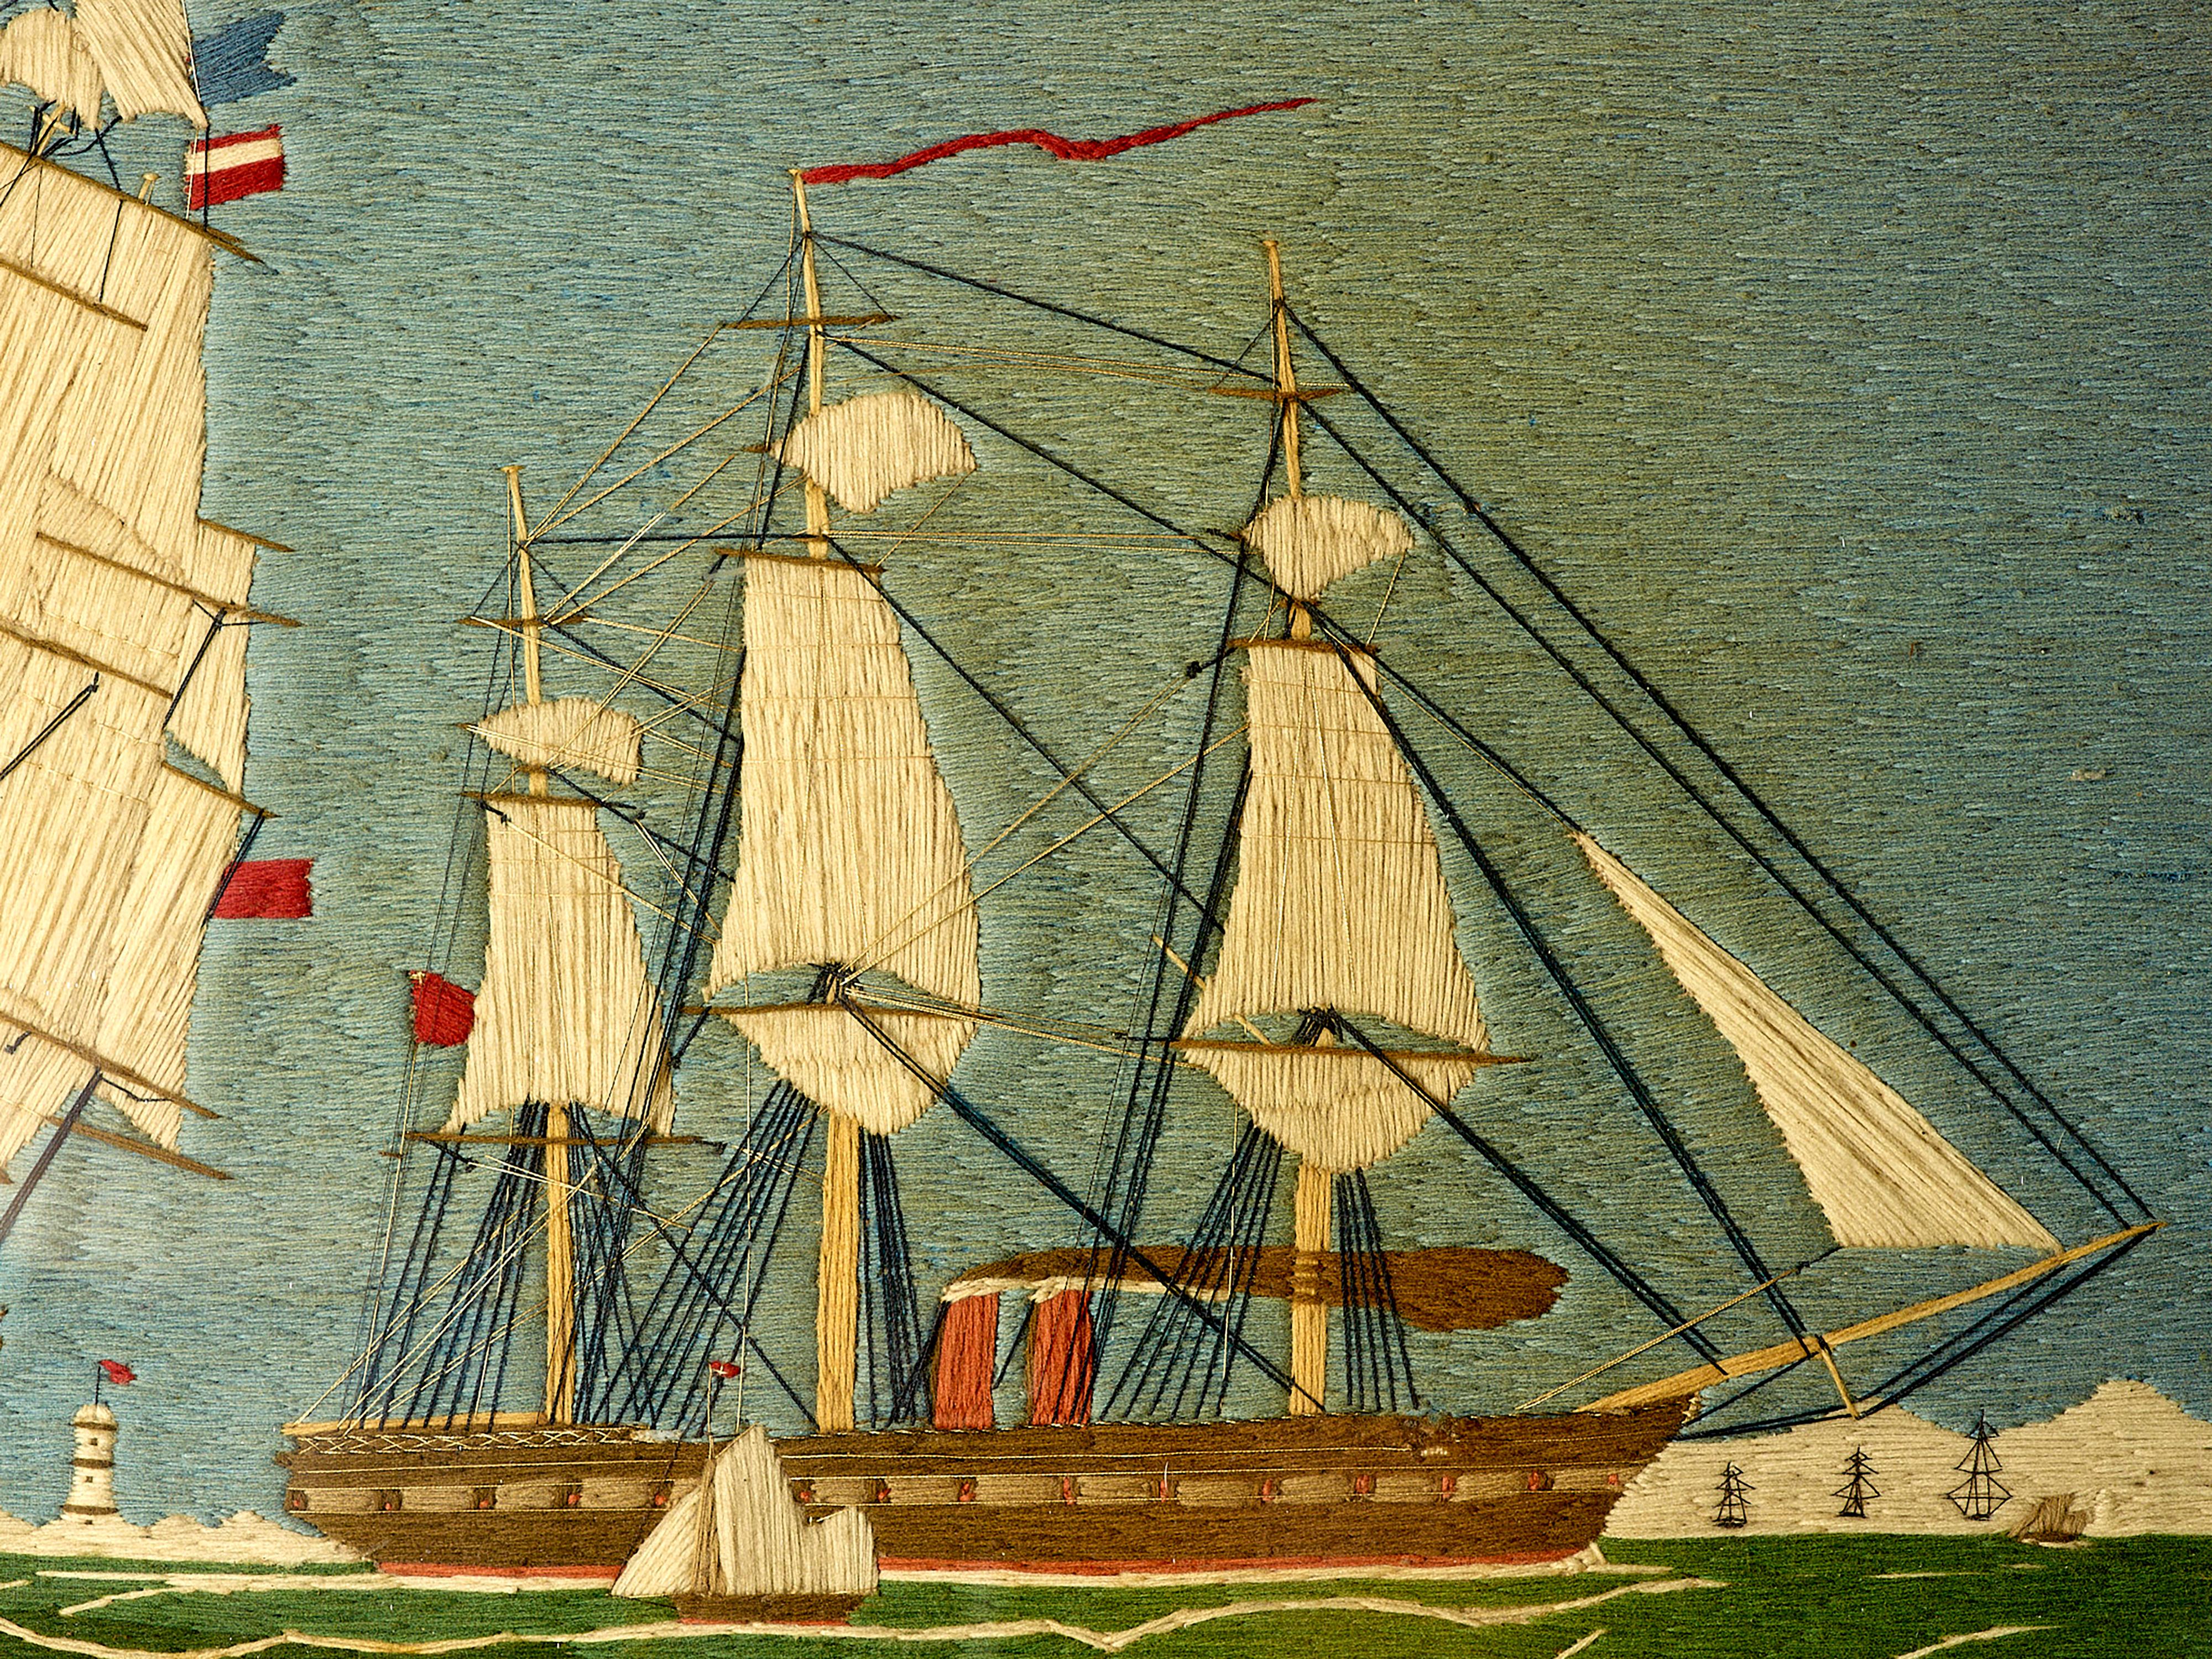 Woolwork ships design
Maple framed woolwork picture depicting a three decker man-o-war and a two-funnelled. With lighthouse and ships in background. Illustrates the transition between sail and steam. Excellent condition with original non-faded